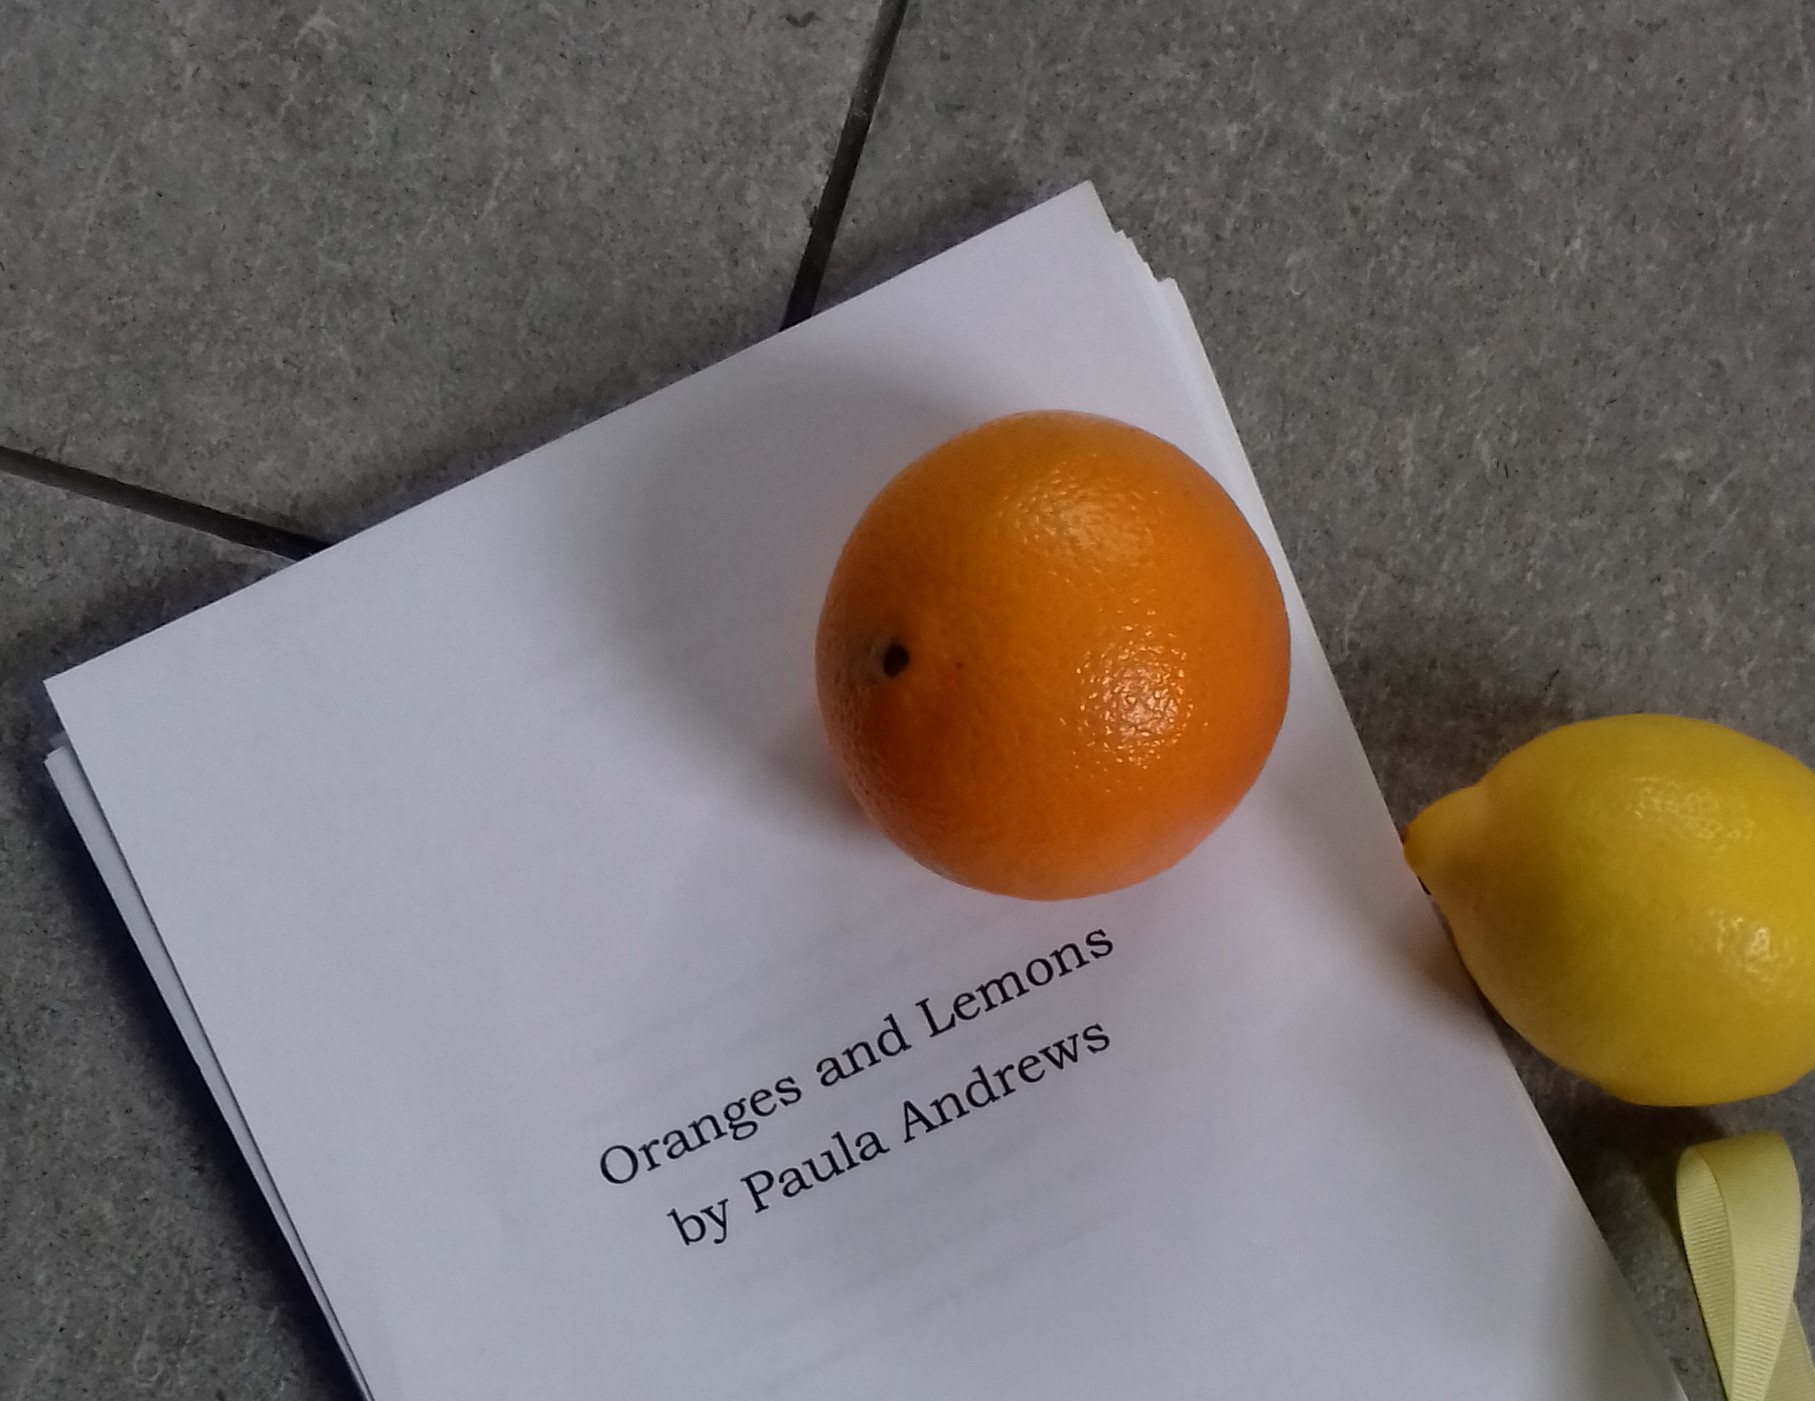 image of manuscript for Oranges and Lemons with an orange and a lemon on top